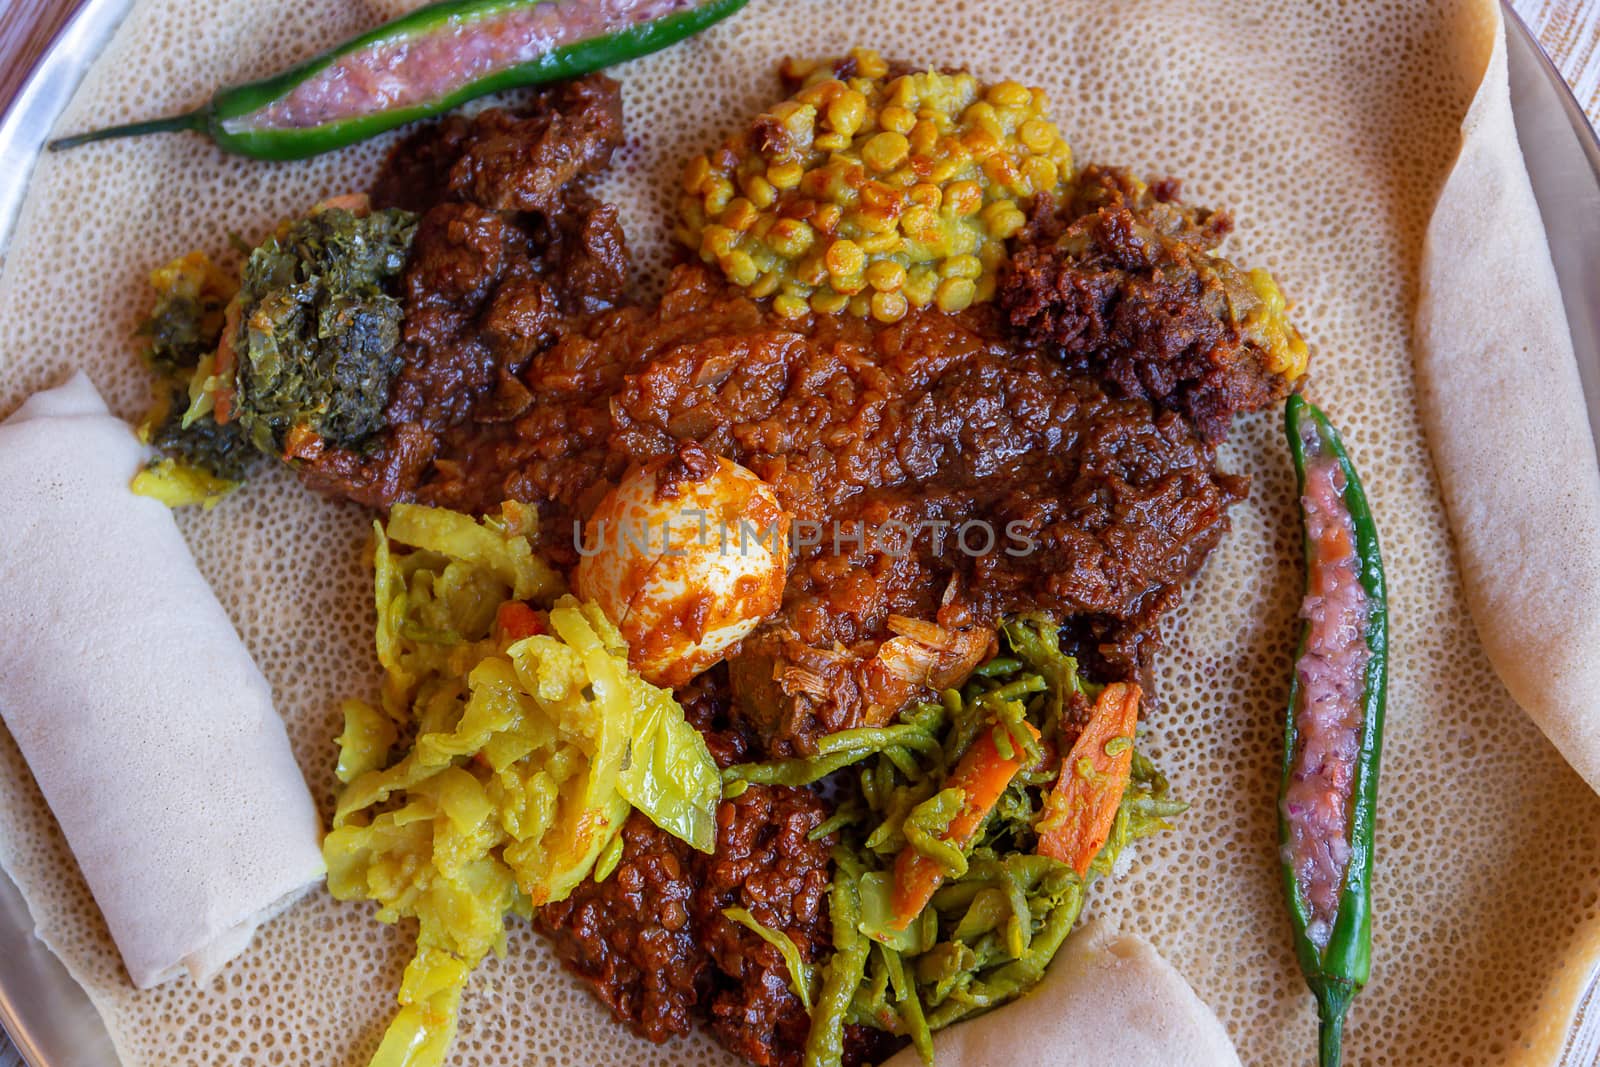 Injera served with Chicken and egg Doro Wat, berbere, vegetables and lentils.  Injera, the national dish of Ethiopia, is a sourdough flatbread made from teff flour.